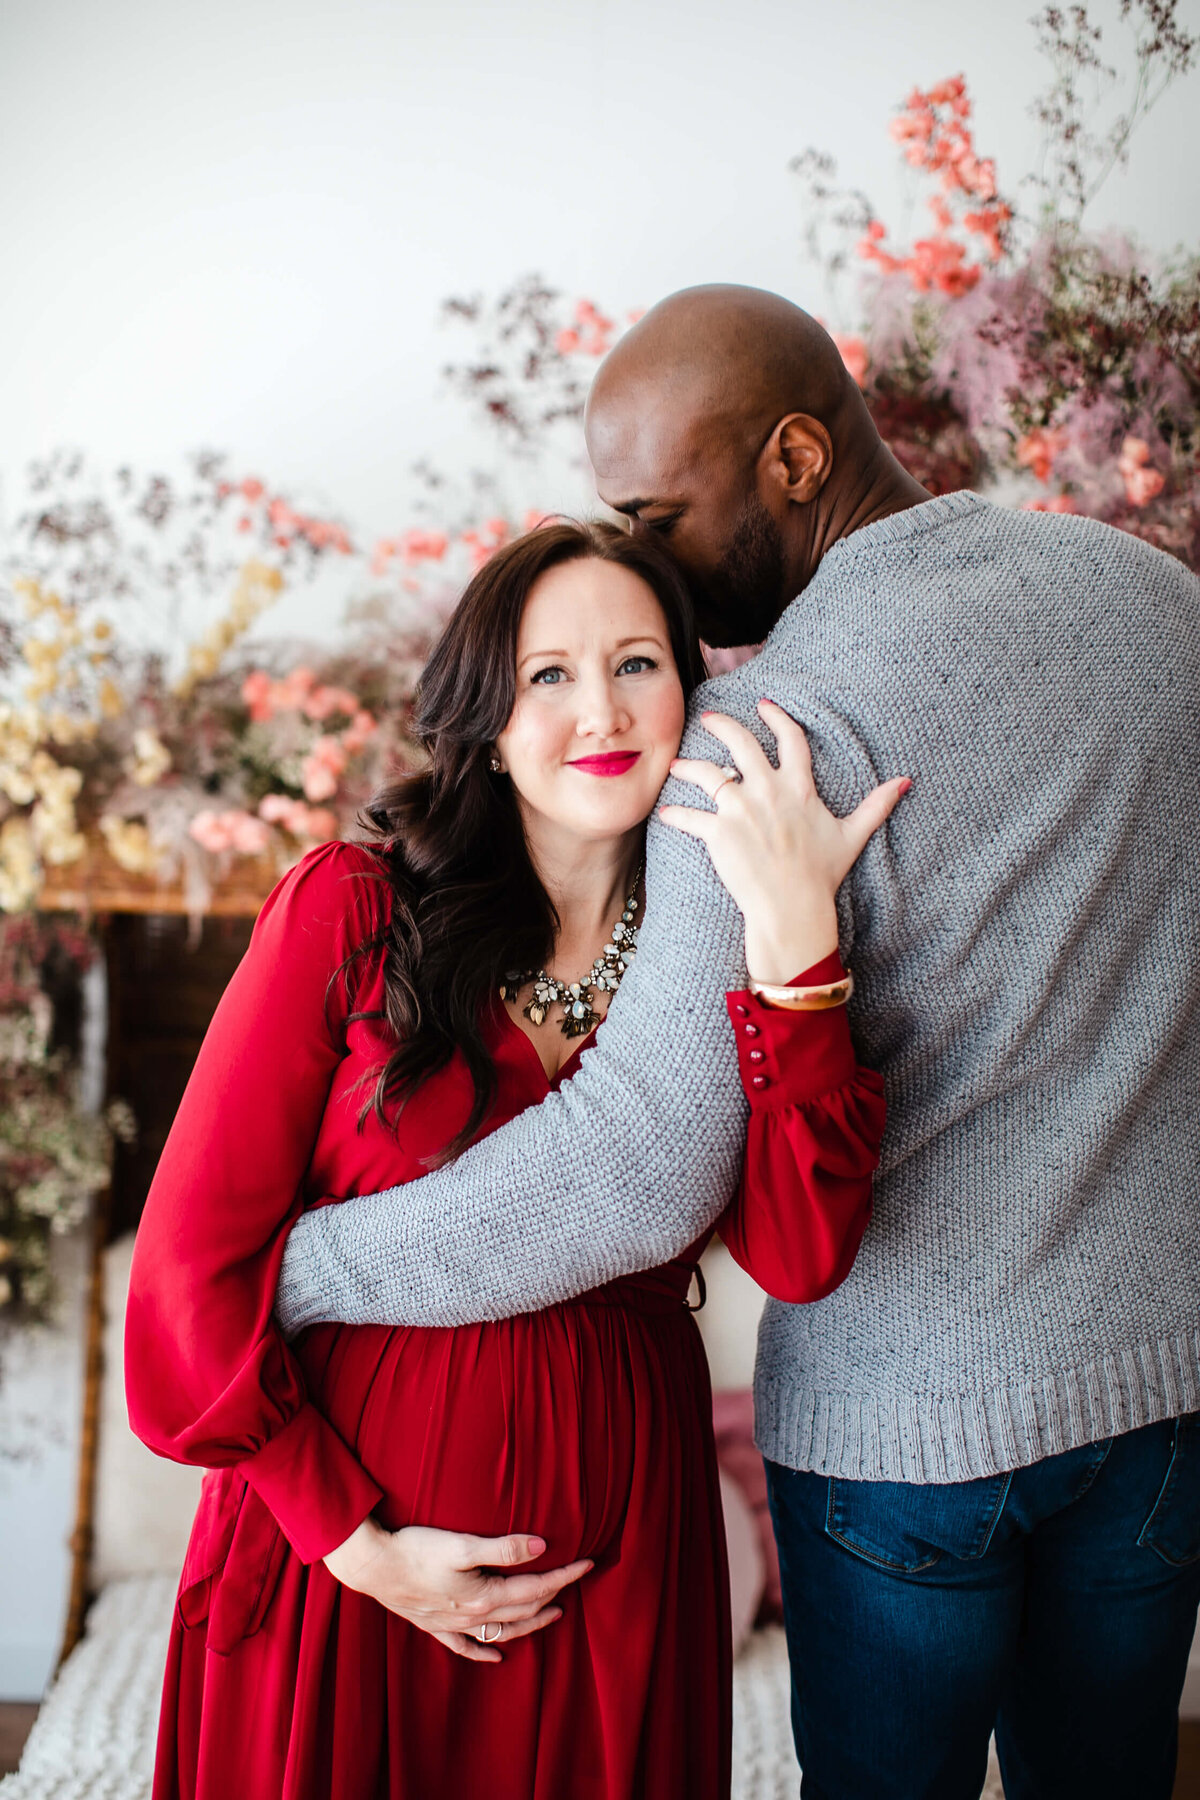 Valentines-Day-Mini-Session-Family-Photography-Woodbury-Minnesota-Sigrid-Dabelstein-Photography-_M4A9267